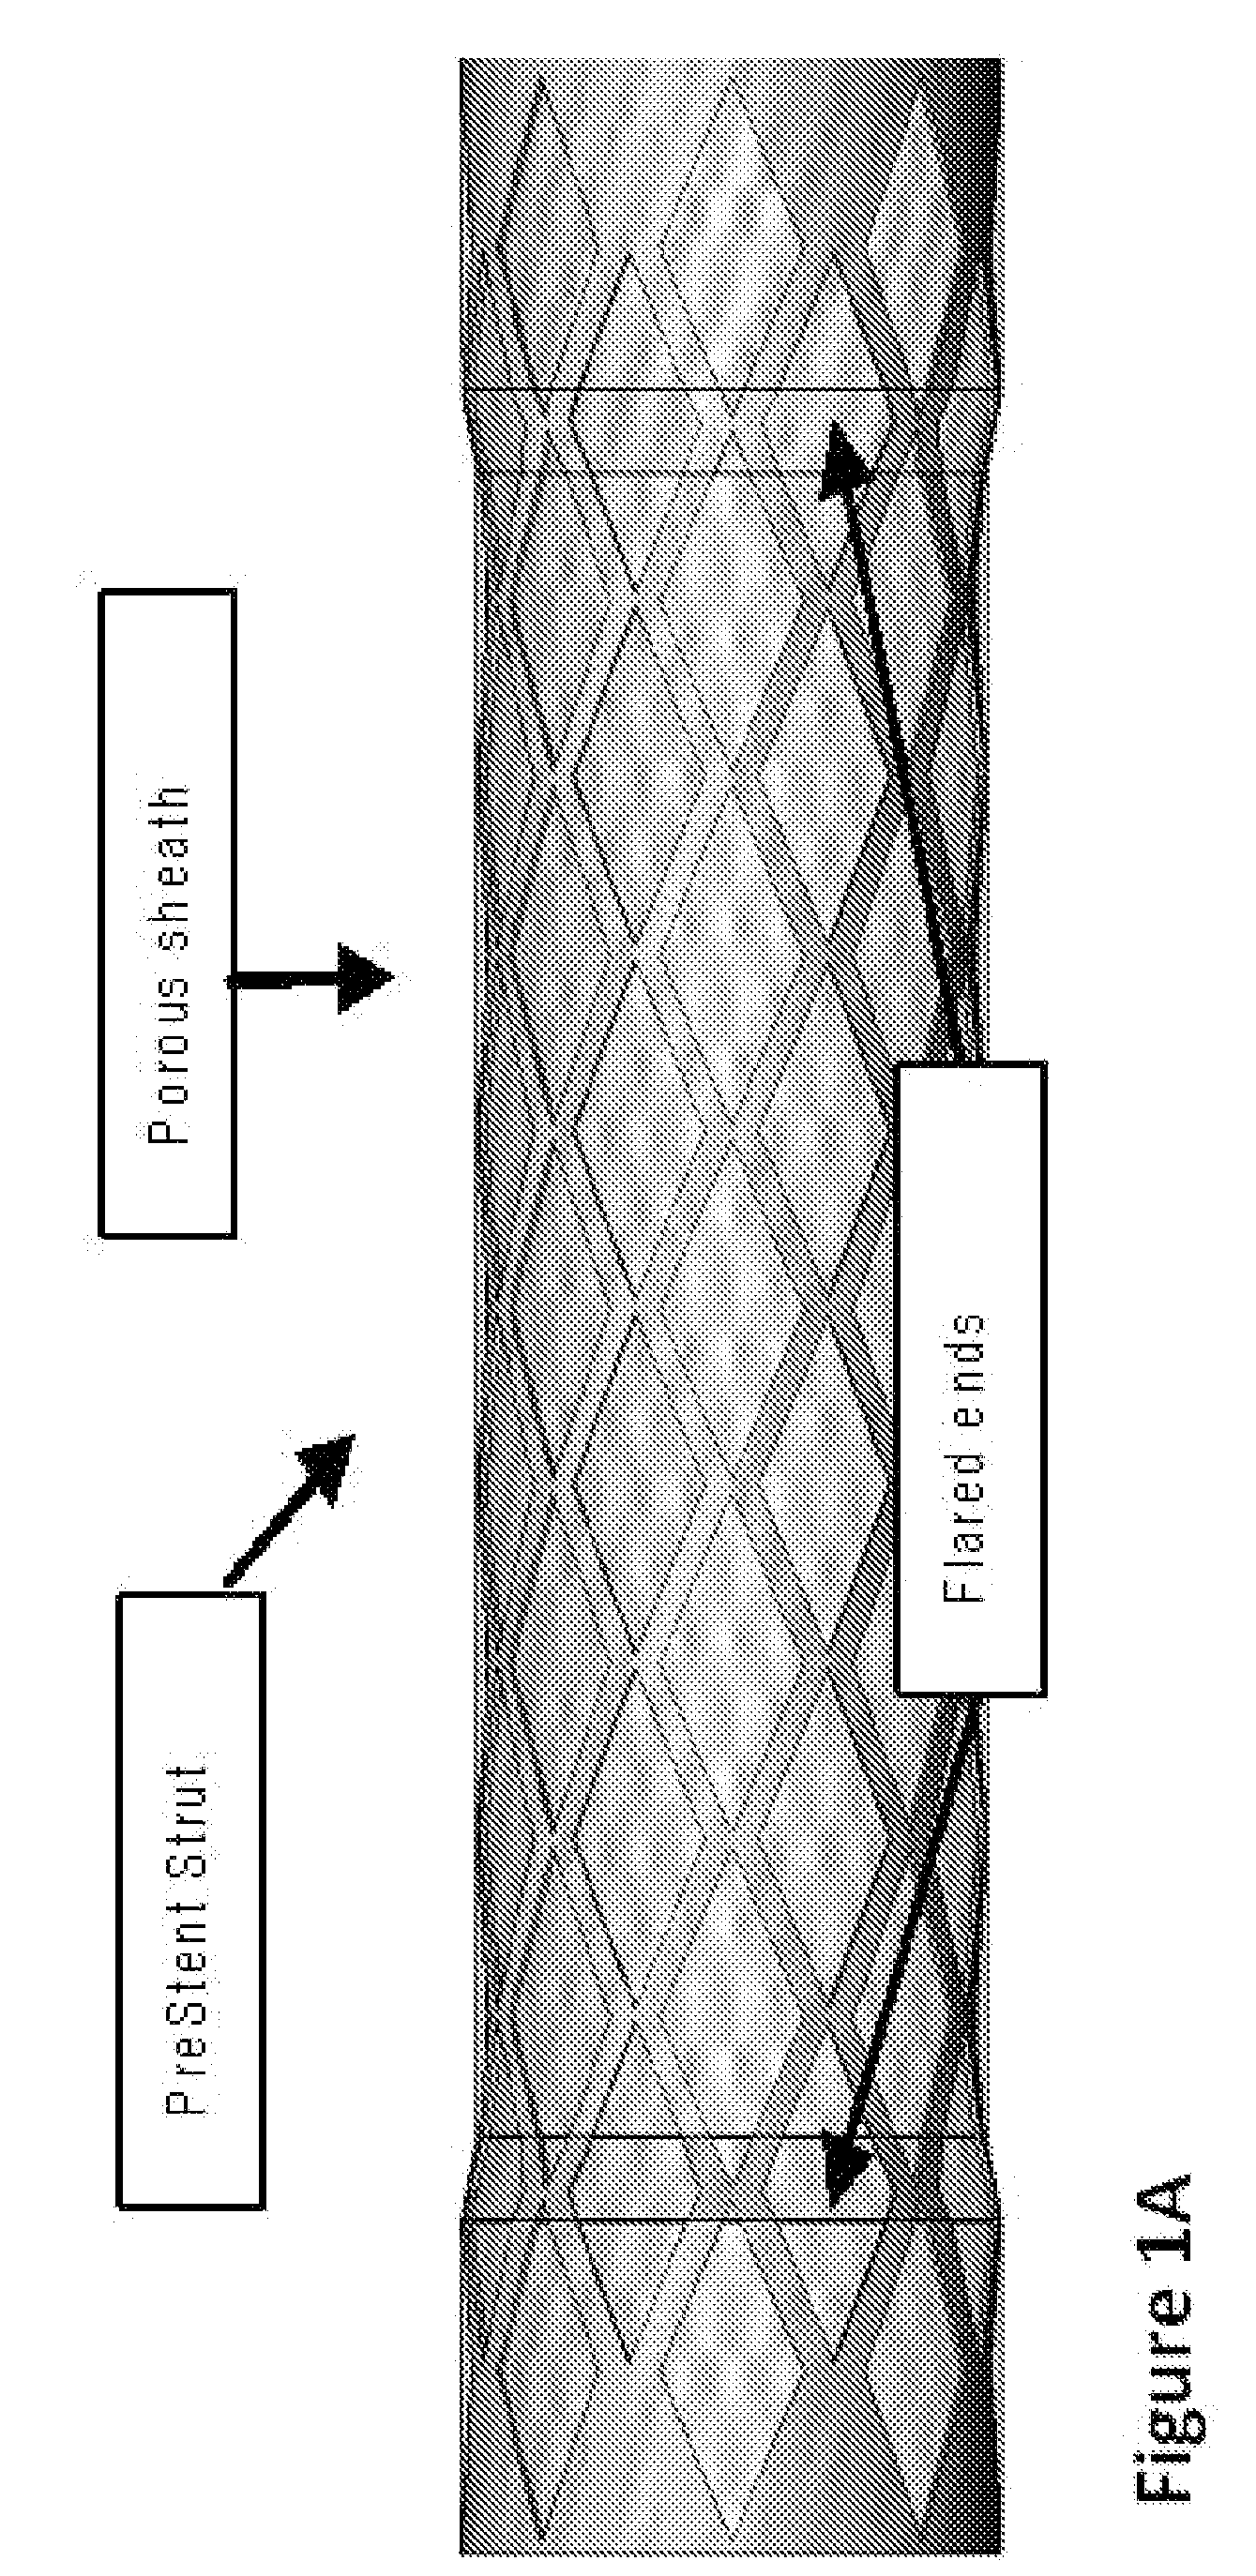 Embolic protection devices and methods